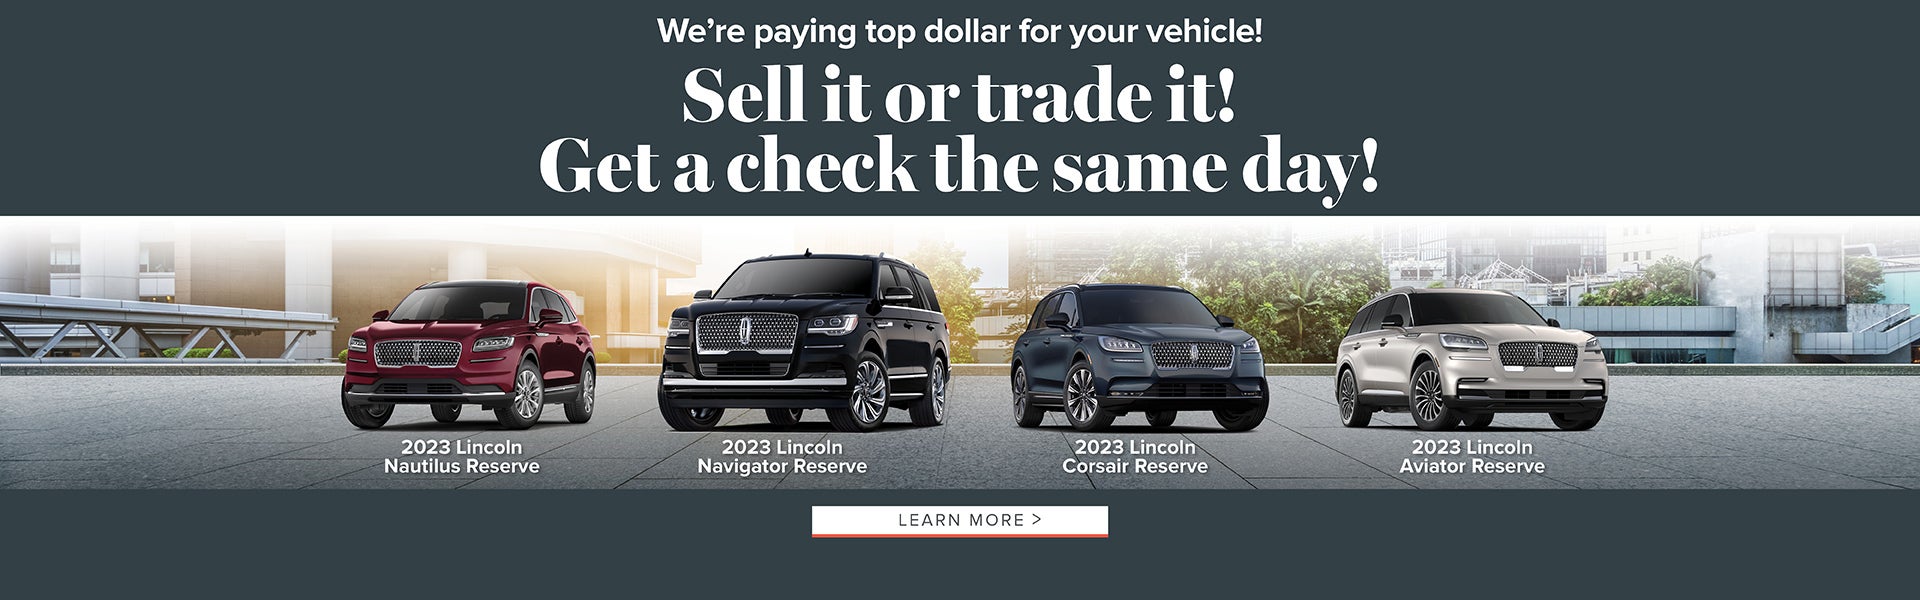 Top Dollar For Your Vehicle